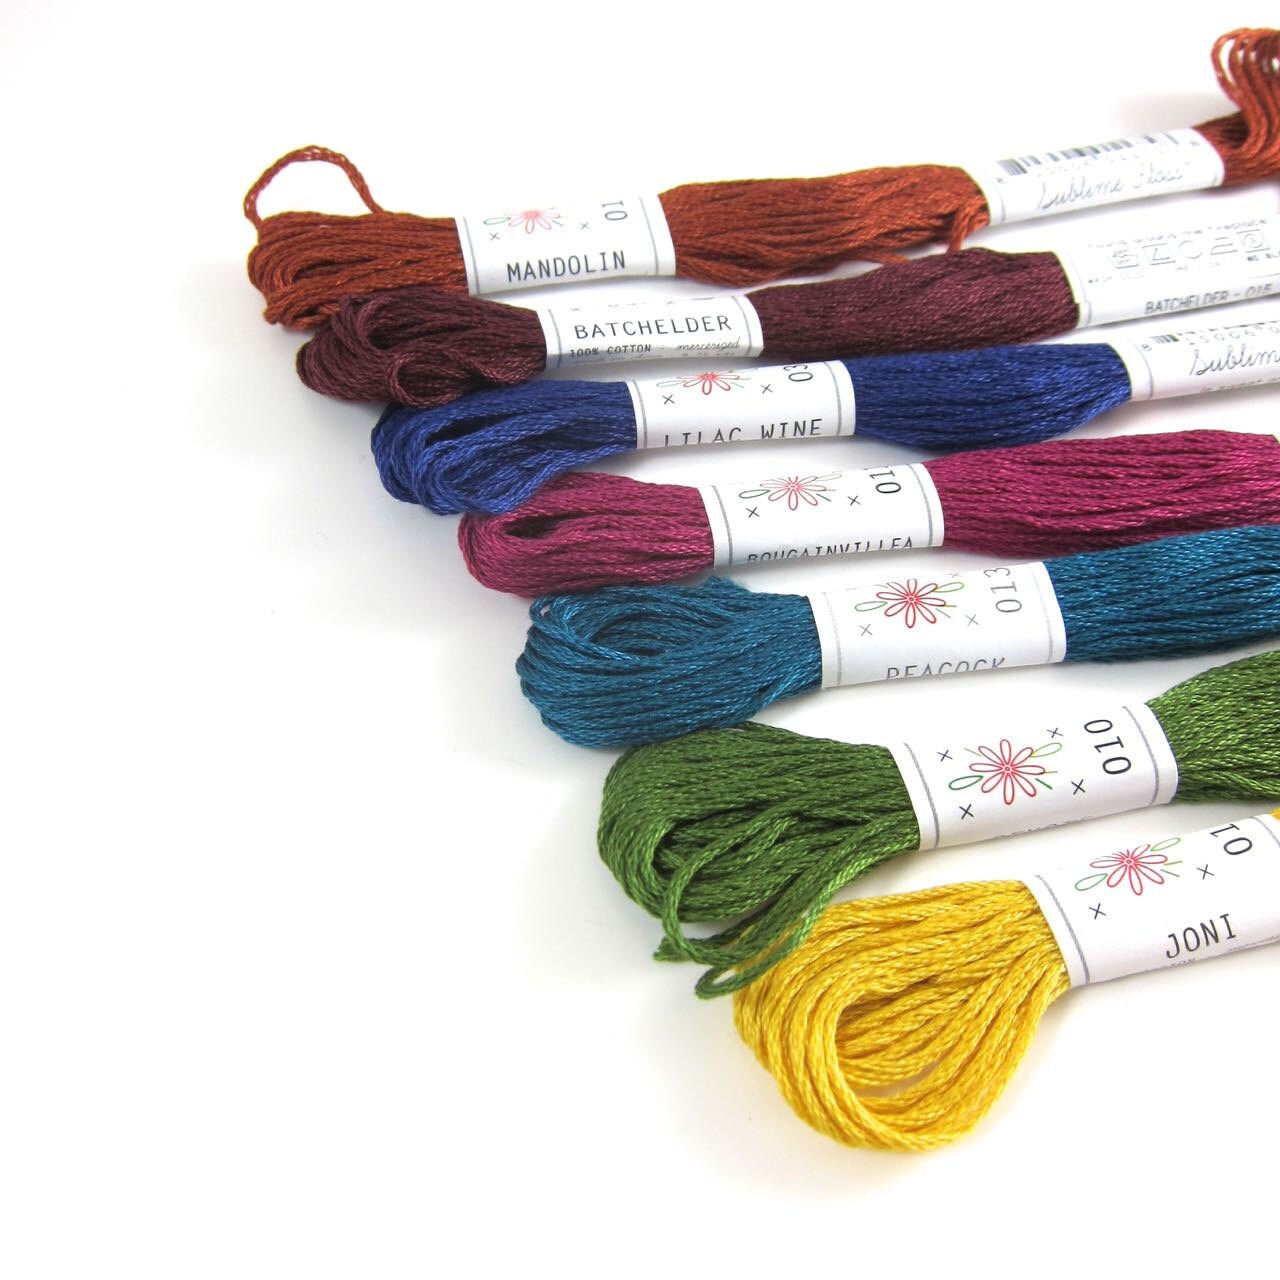 Embroidery Floss Set Sublime Stitching Embroidery Thread